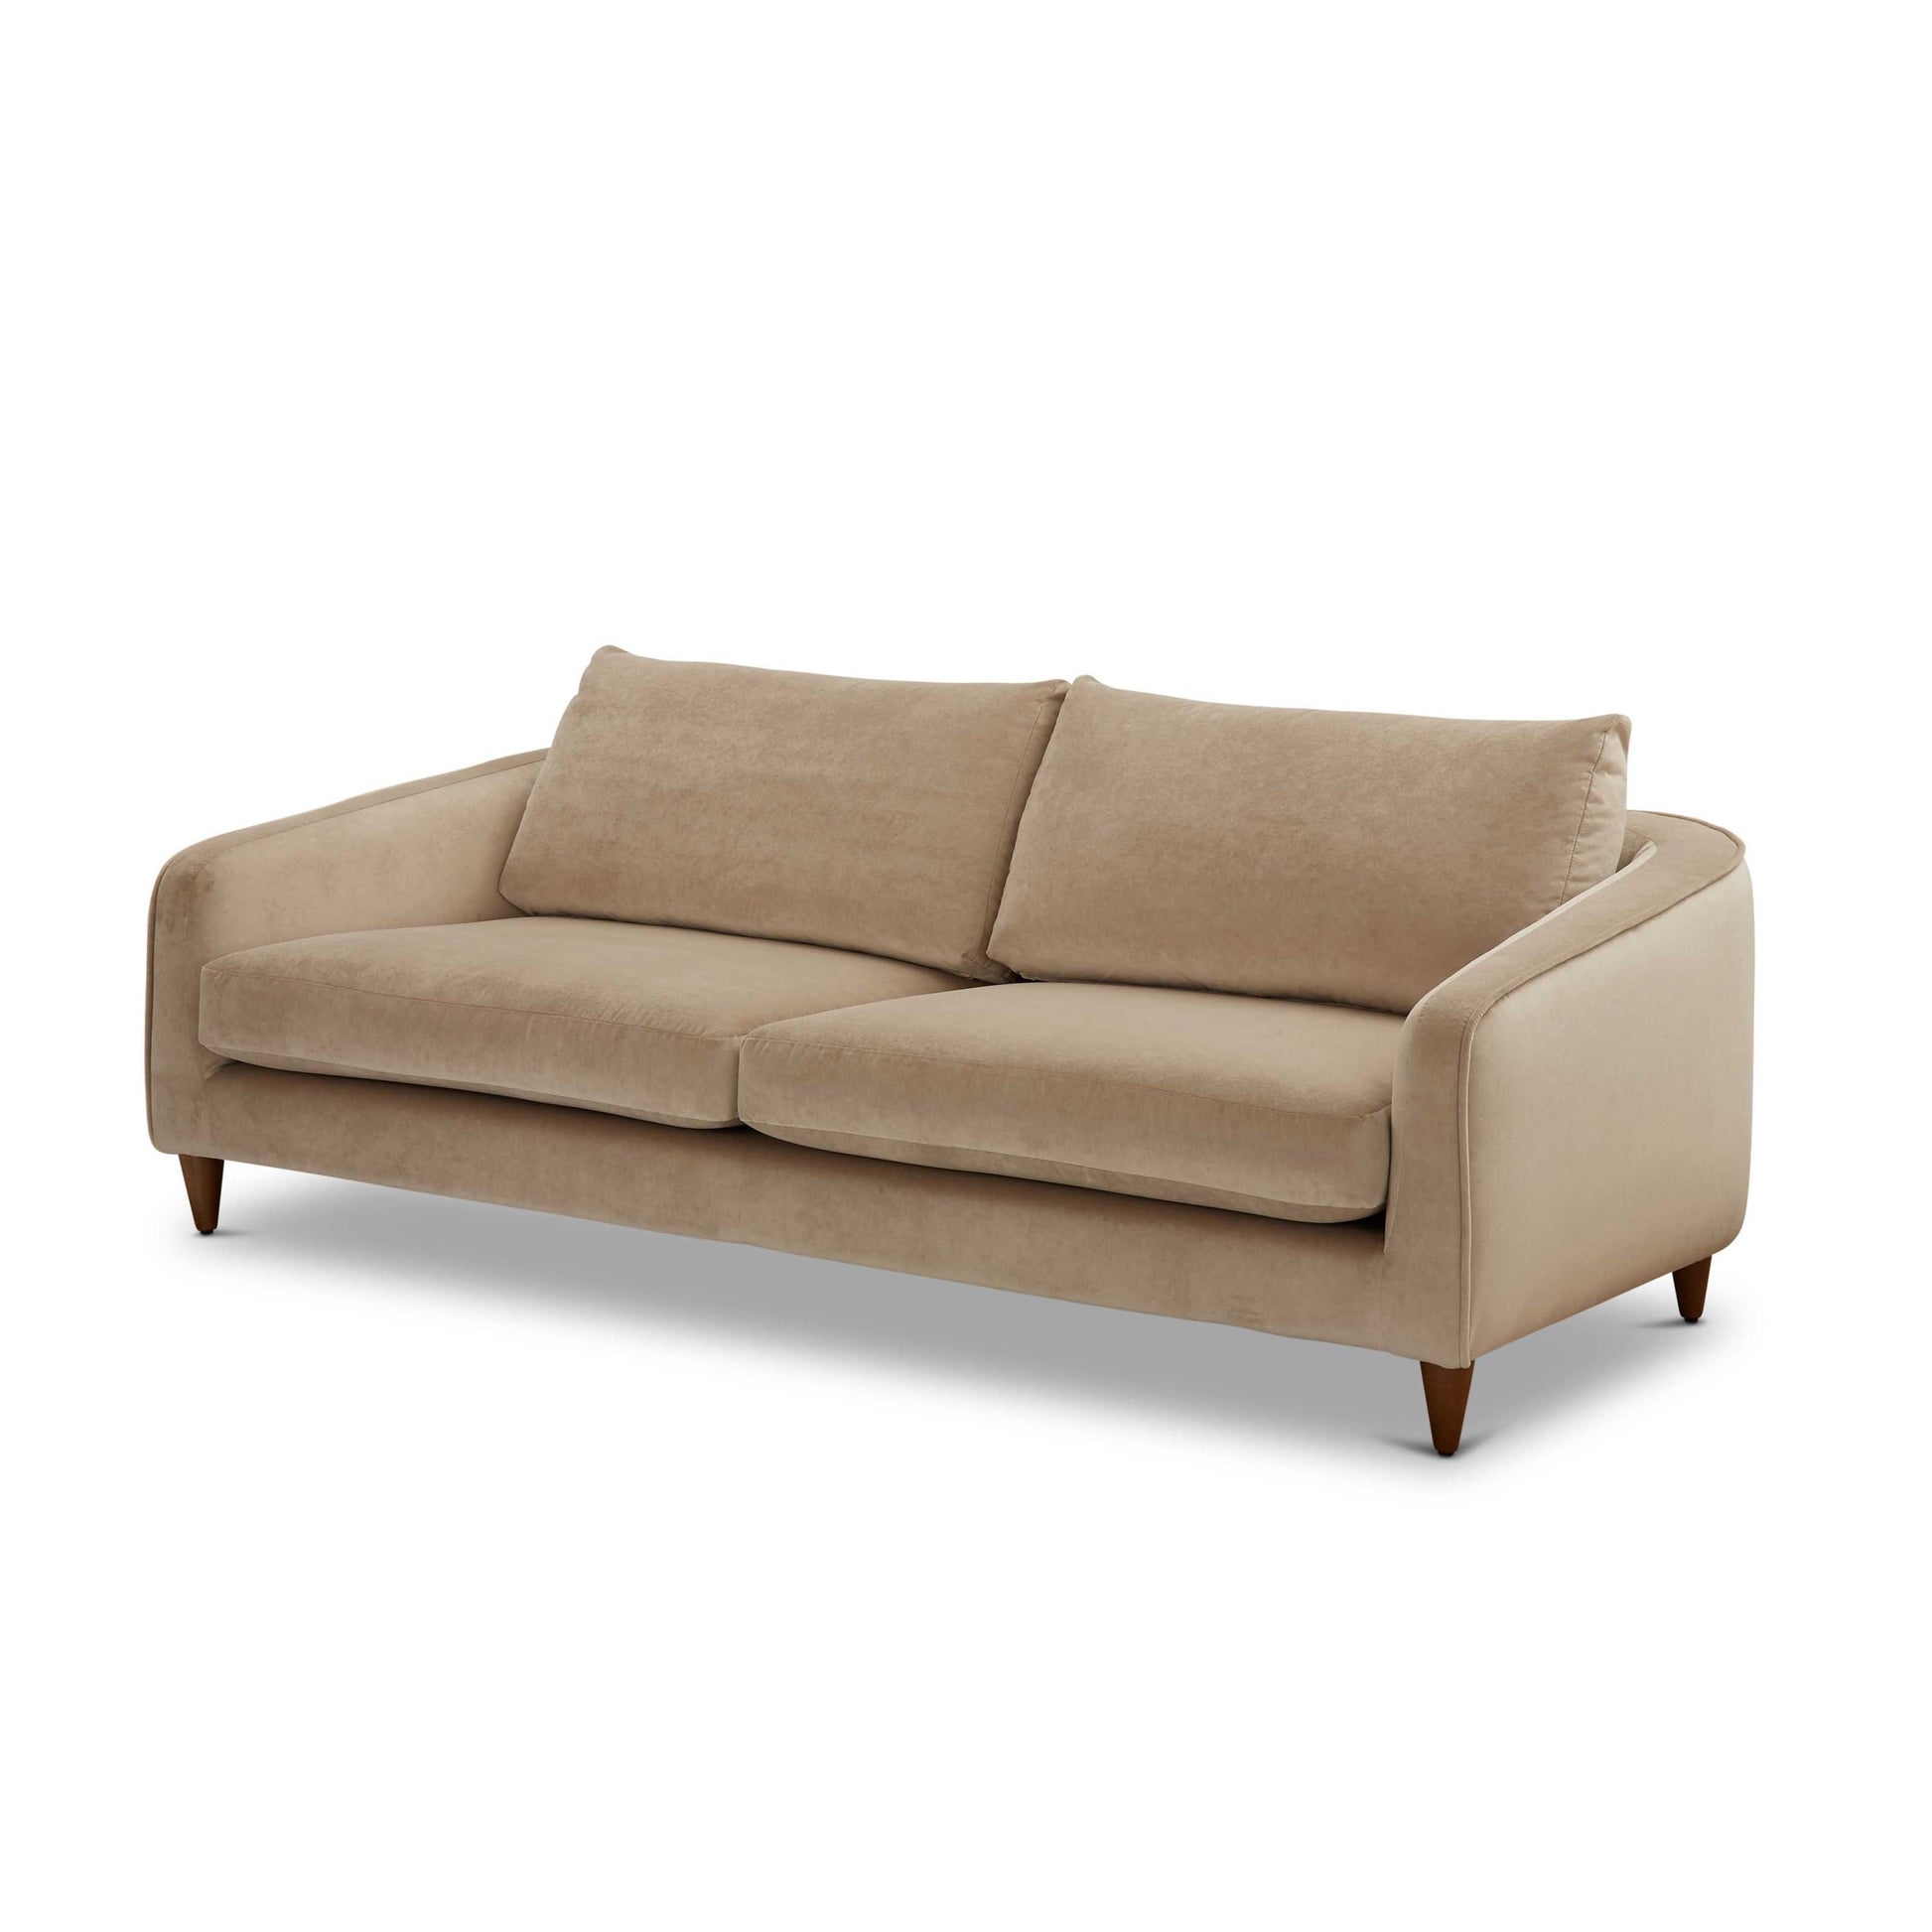 Montana Sofa by Molmic available from Make Your House A Home, Furniture Store located in Bendigo, Victoria. Australian Made in Melbourne.